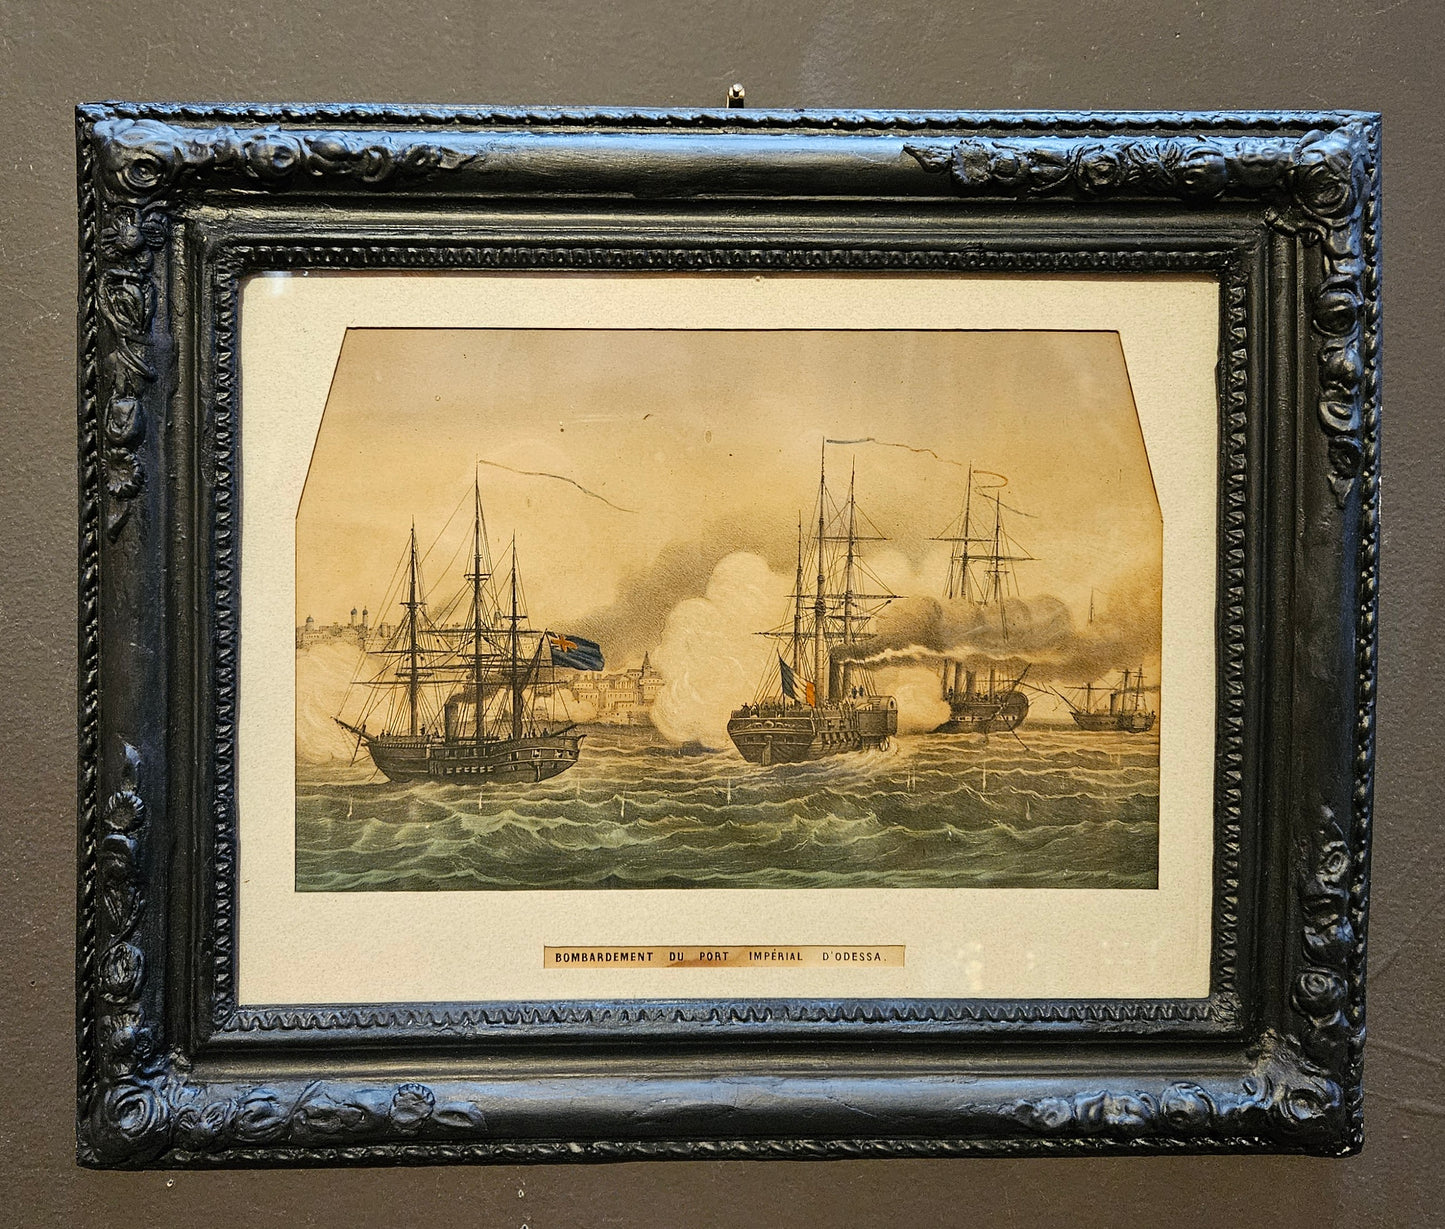 Framed Lithograph print "Bombardment of Odessa - 22nd April, 1854"